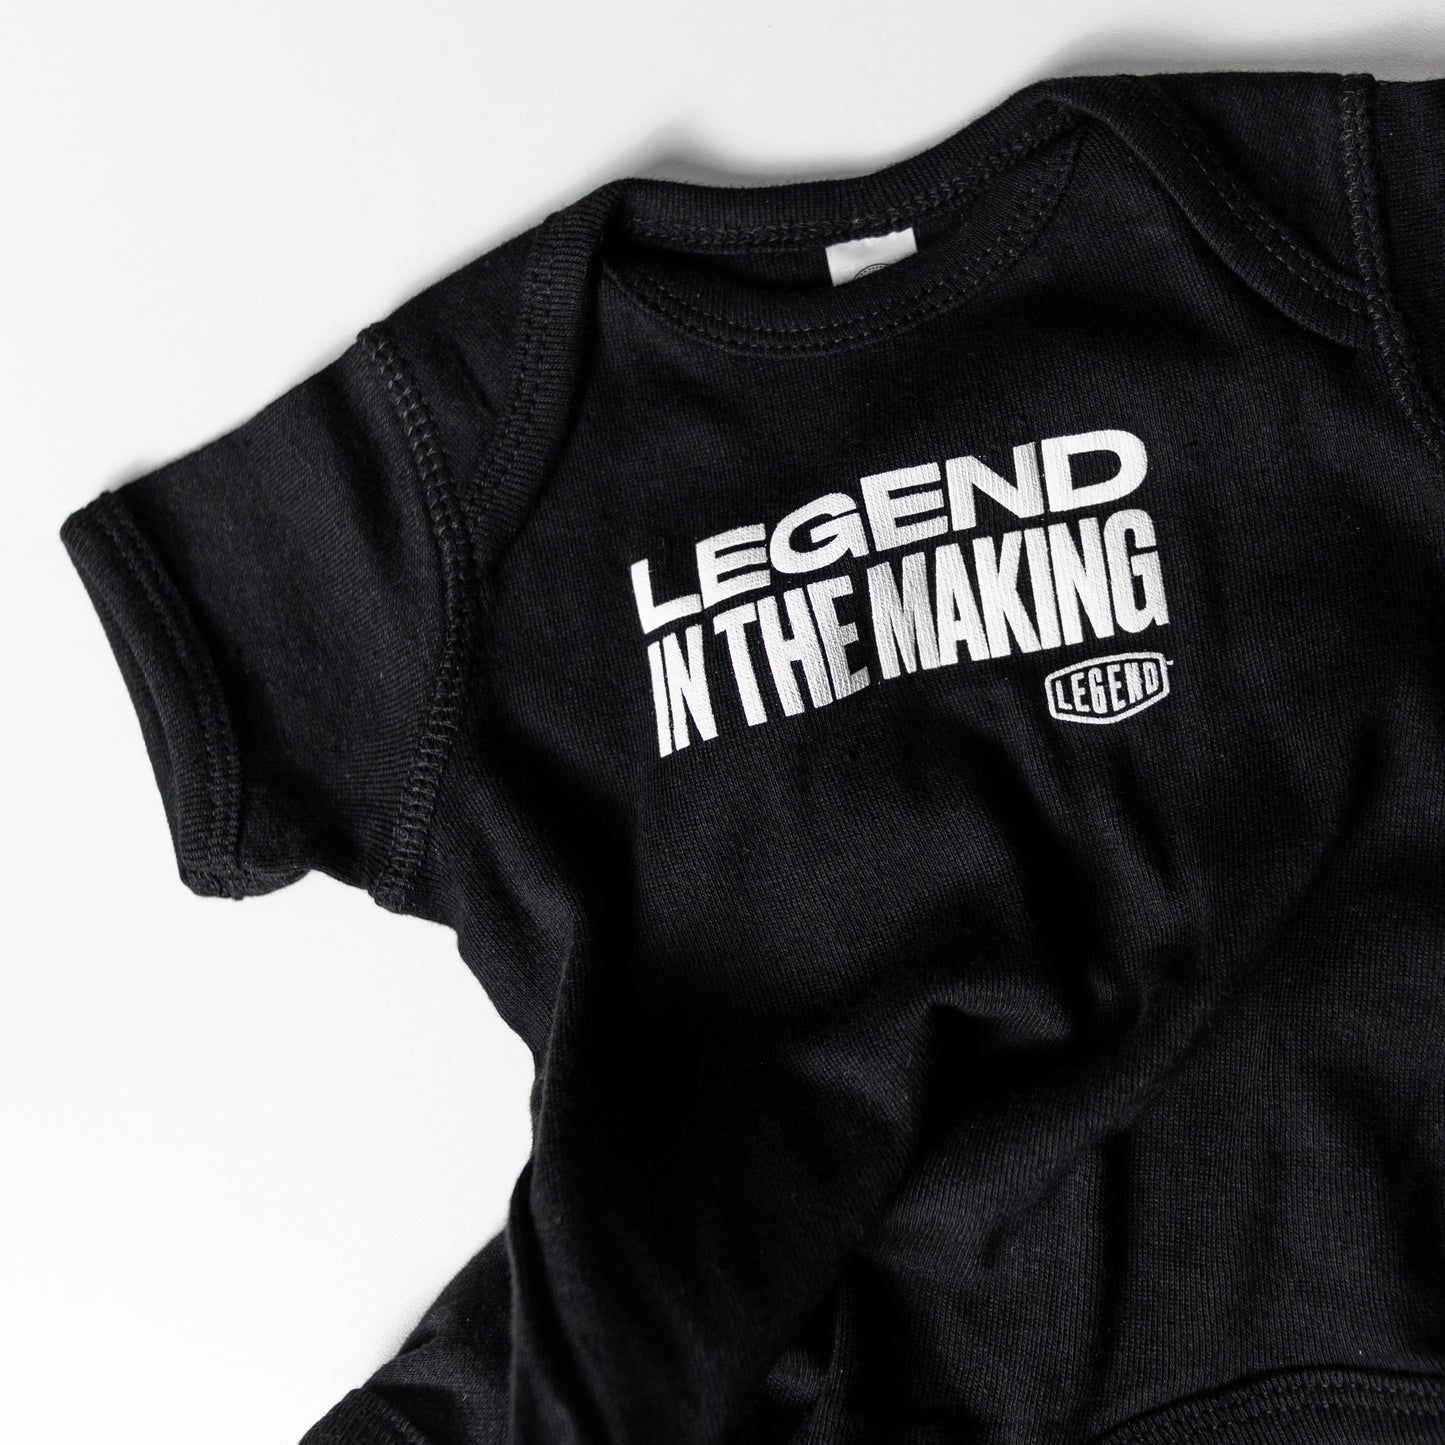 The "Legend in the Making" Baby Onesie